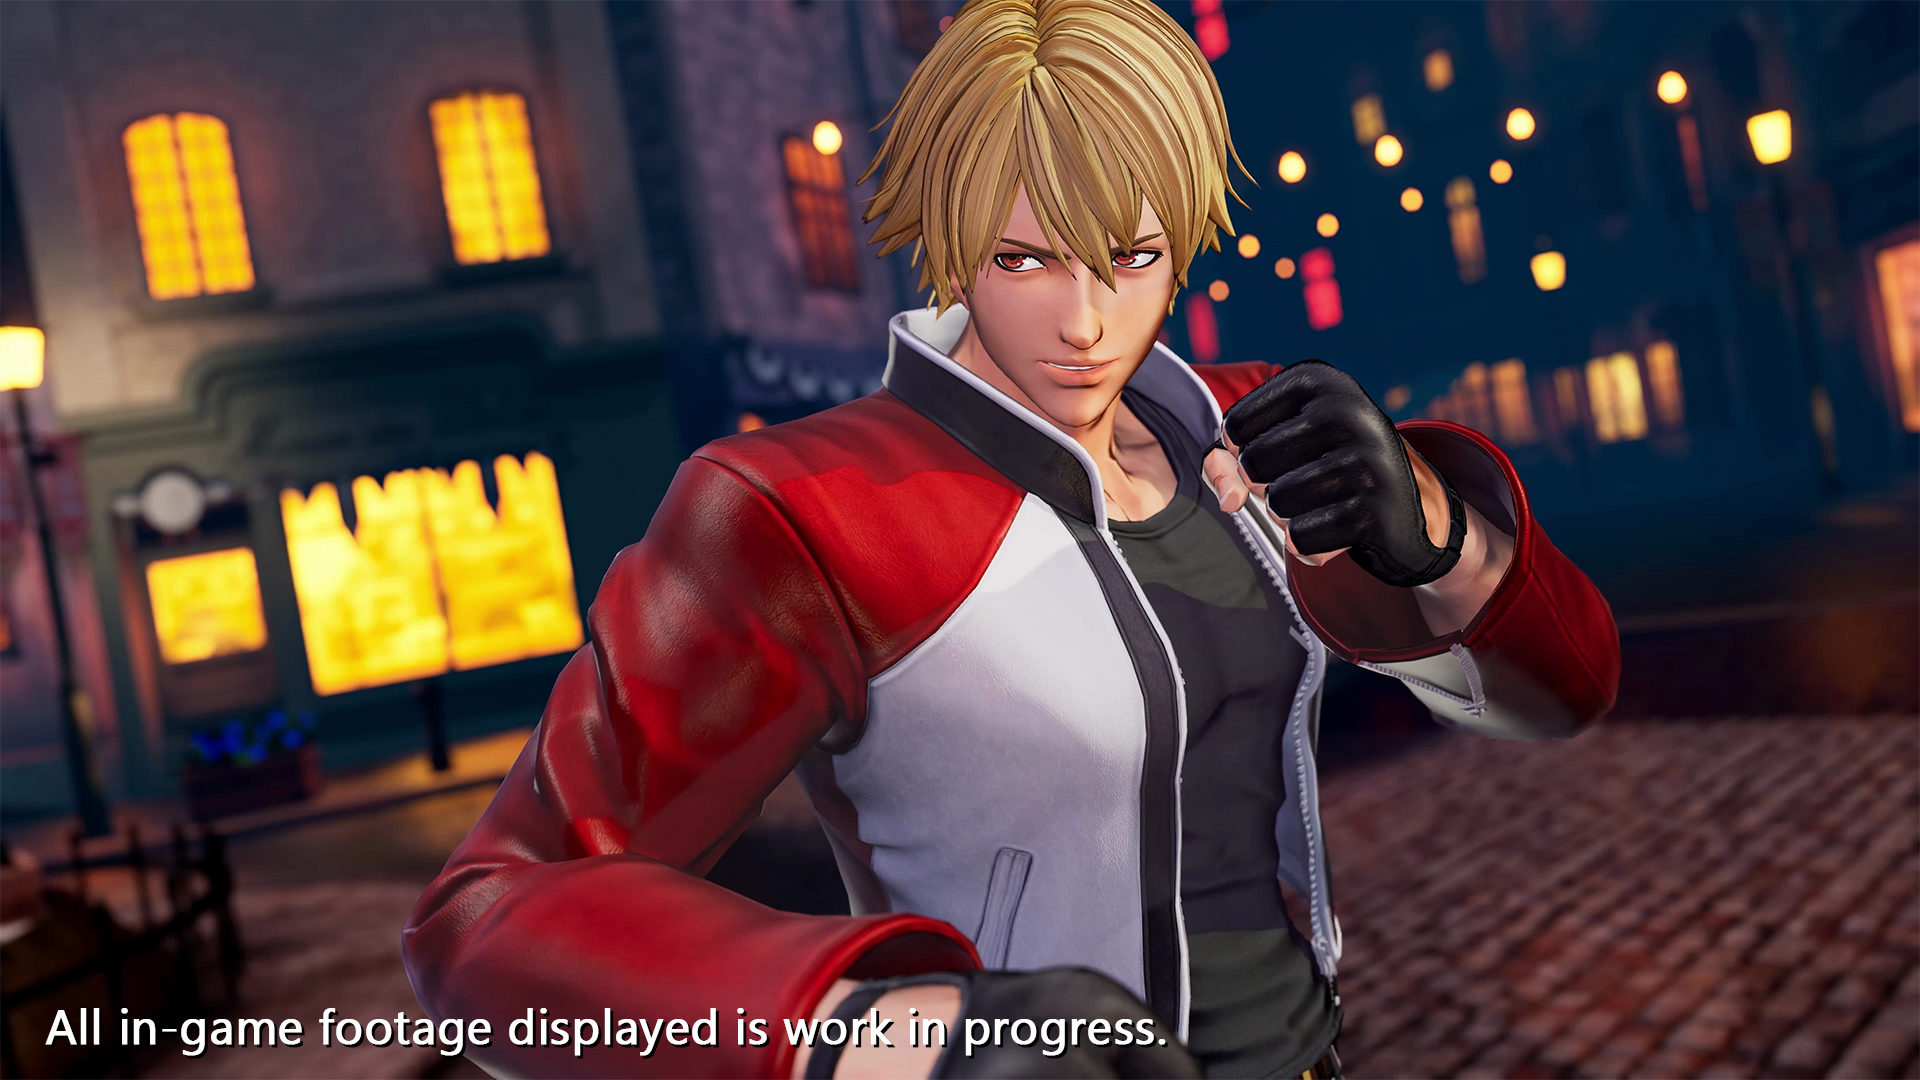 The King of Fighters XV - TFG Profile / Art Gallery / Screenshots